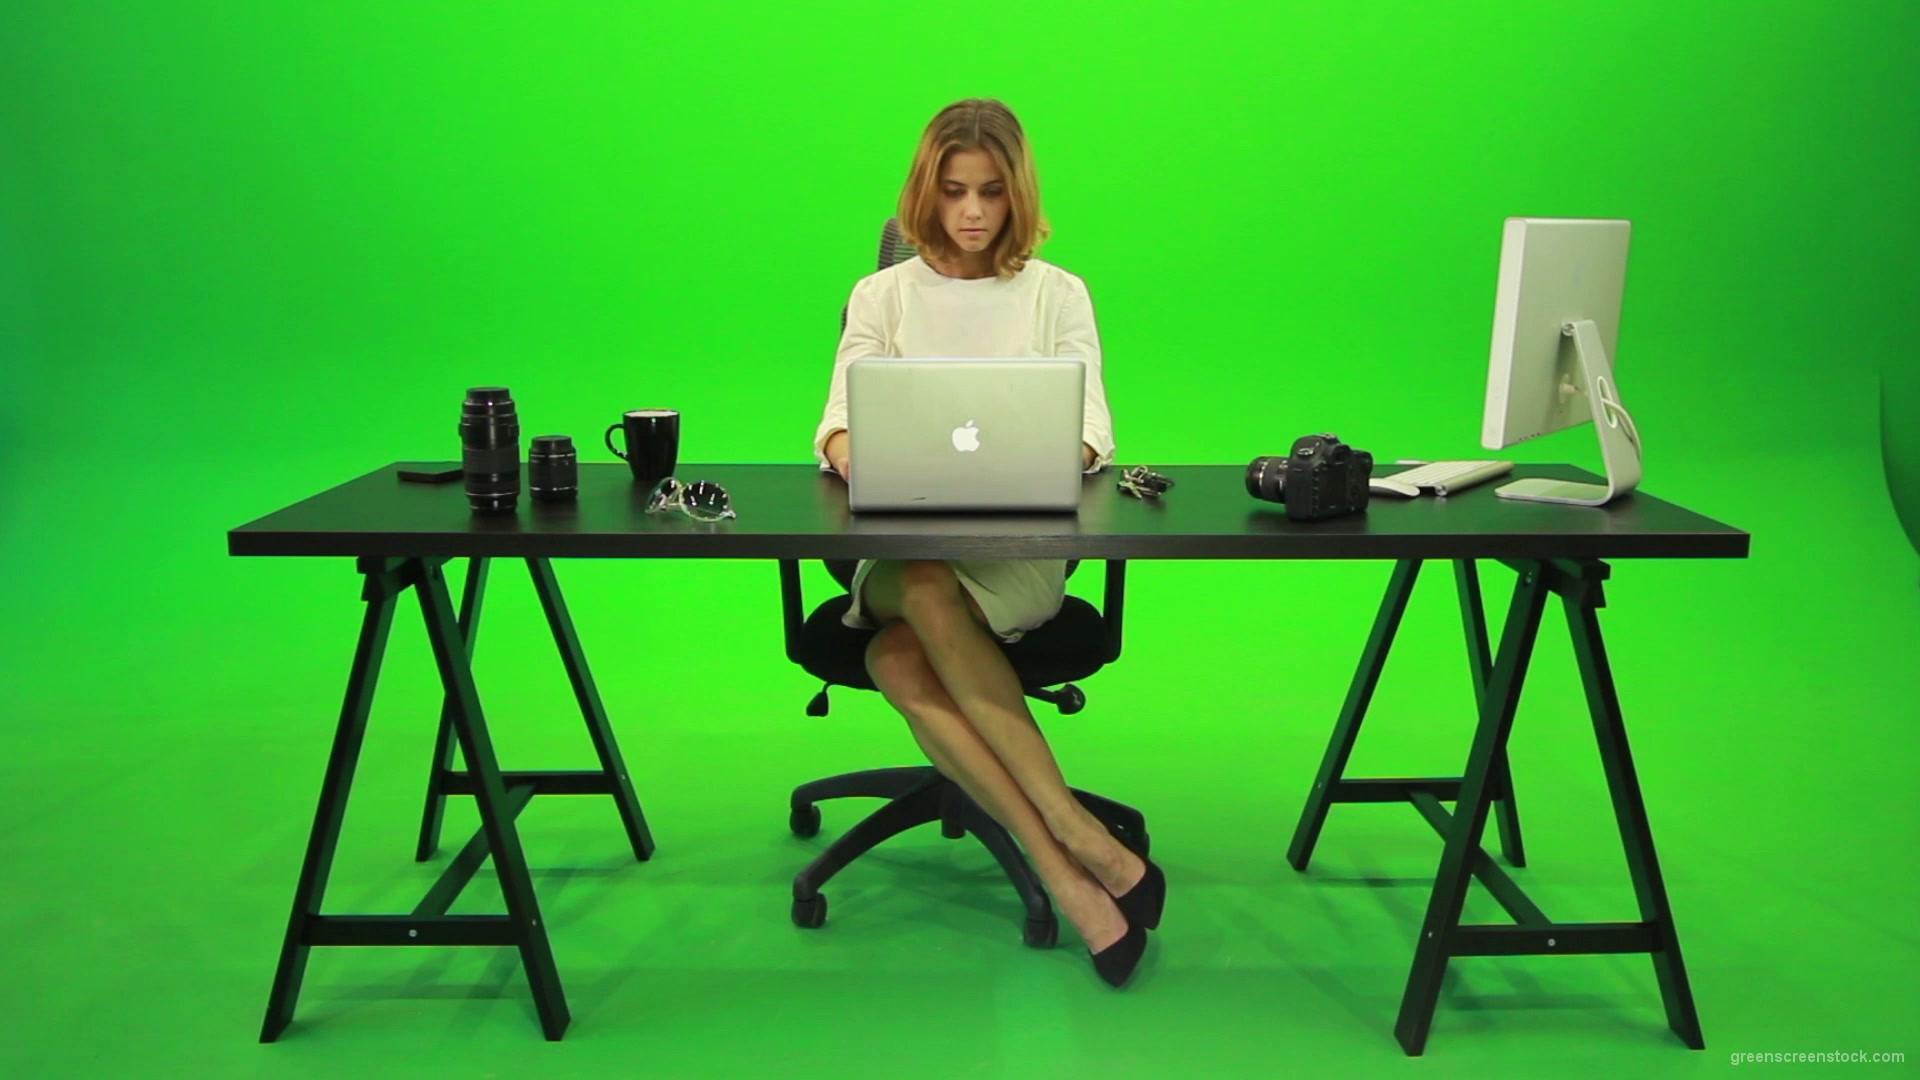 Business-Woman-Working-in-the-Office-Green-Screen-Footage_005 Green Screen Stock